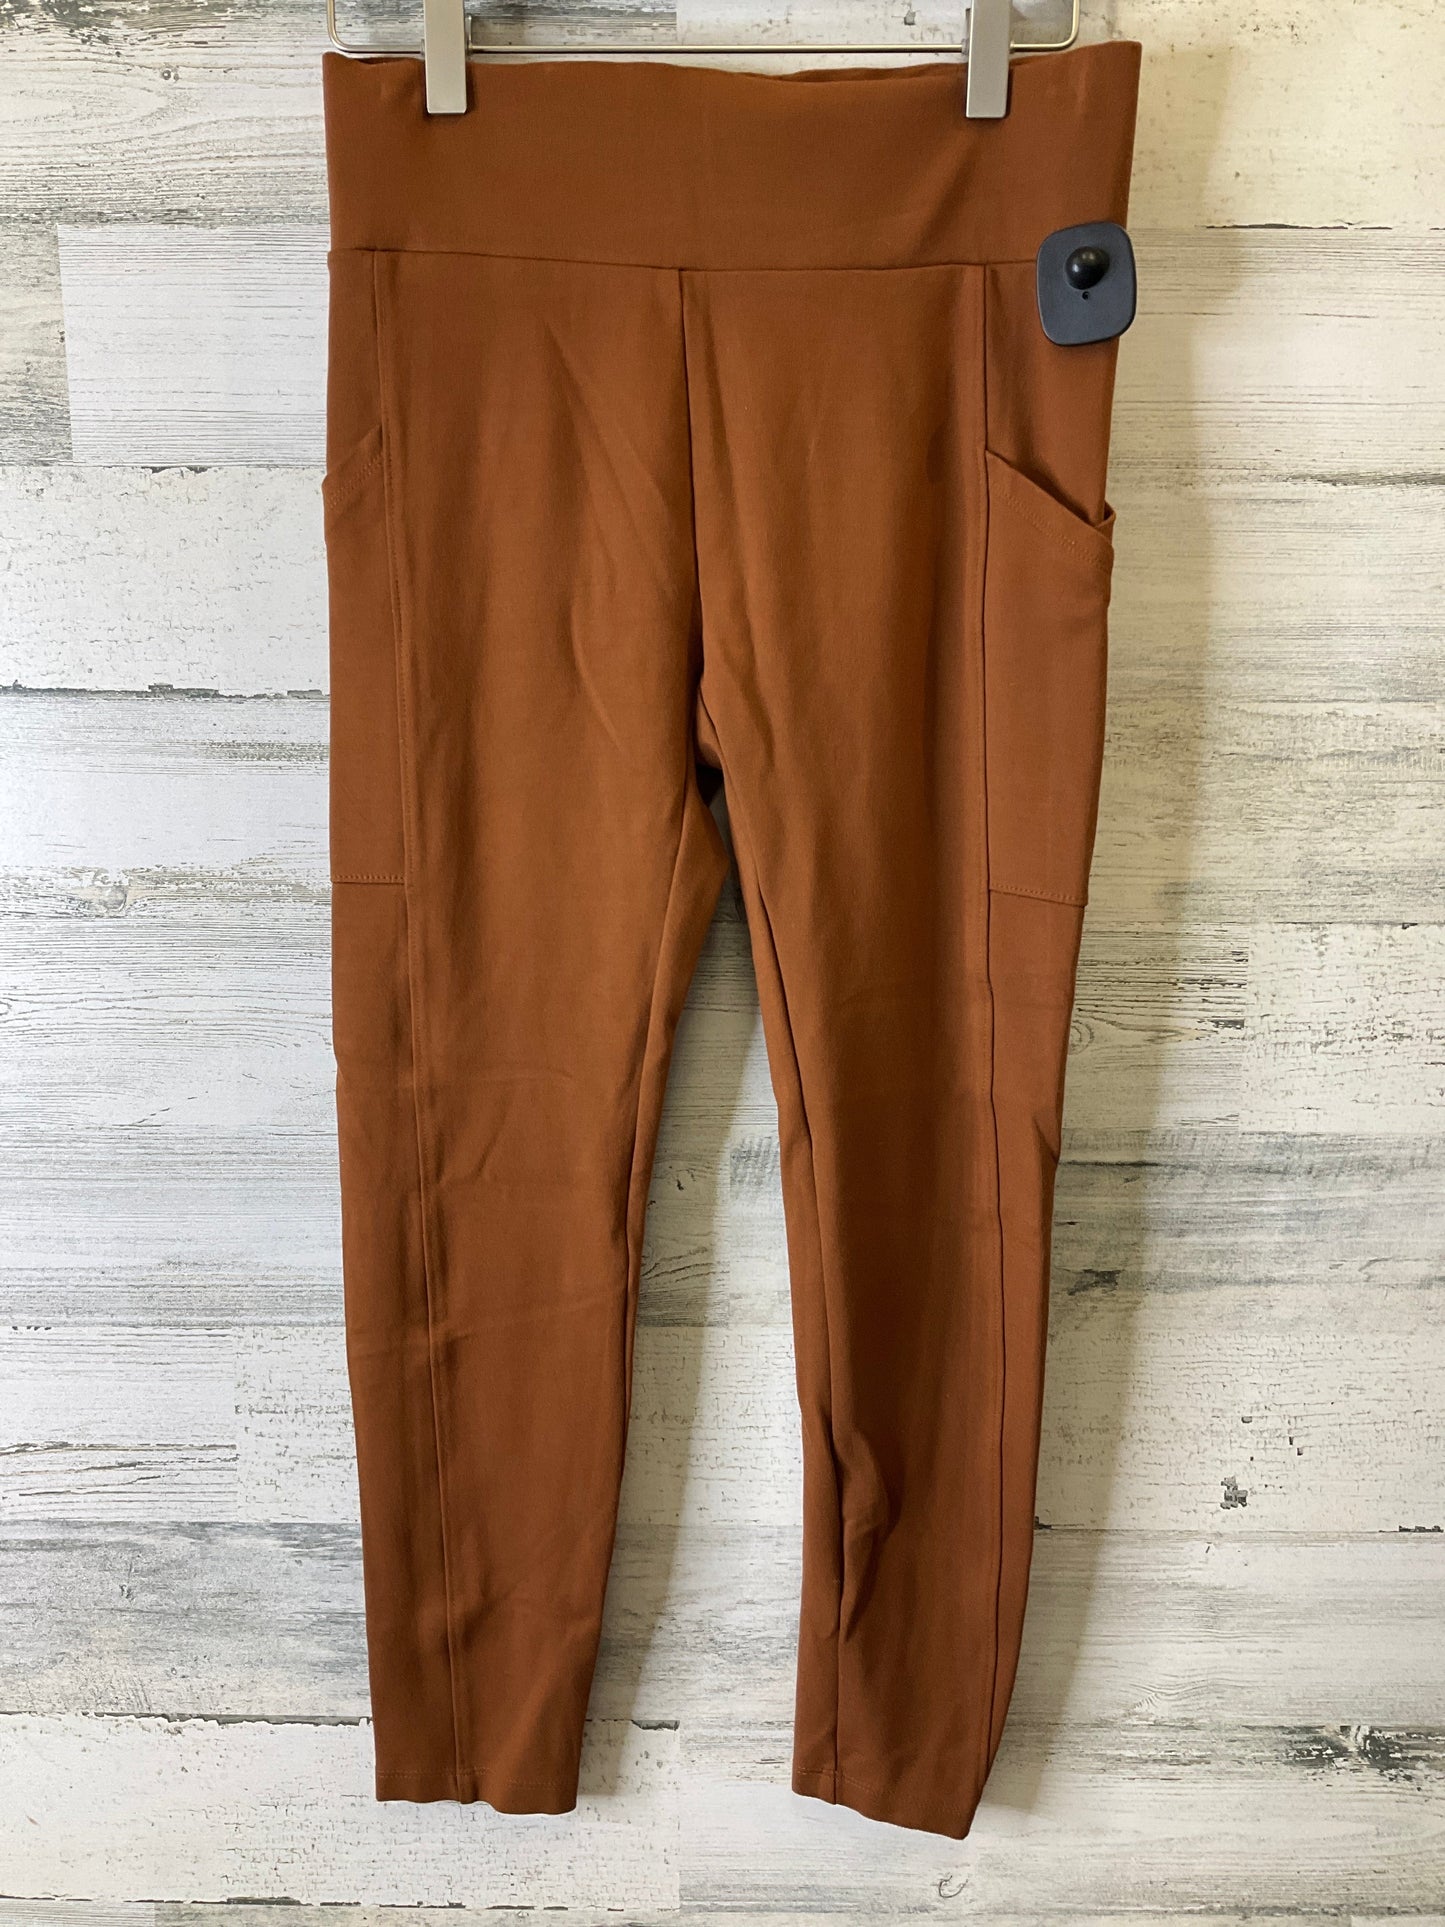 Bronze Athletic Leggings Lou And Grey, Size 4